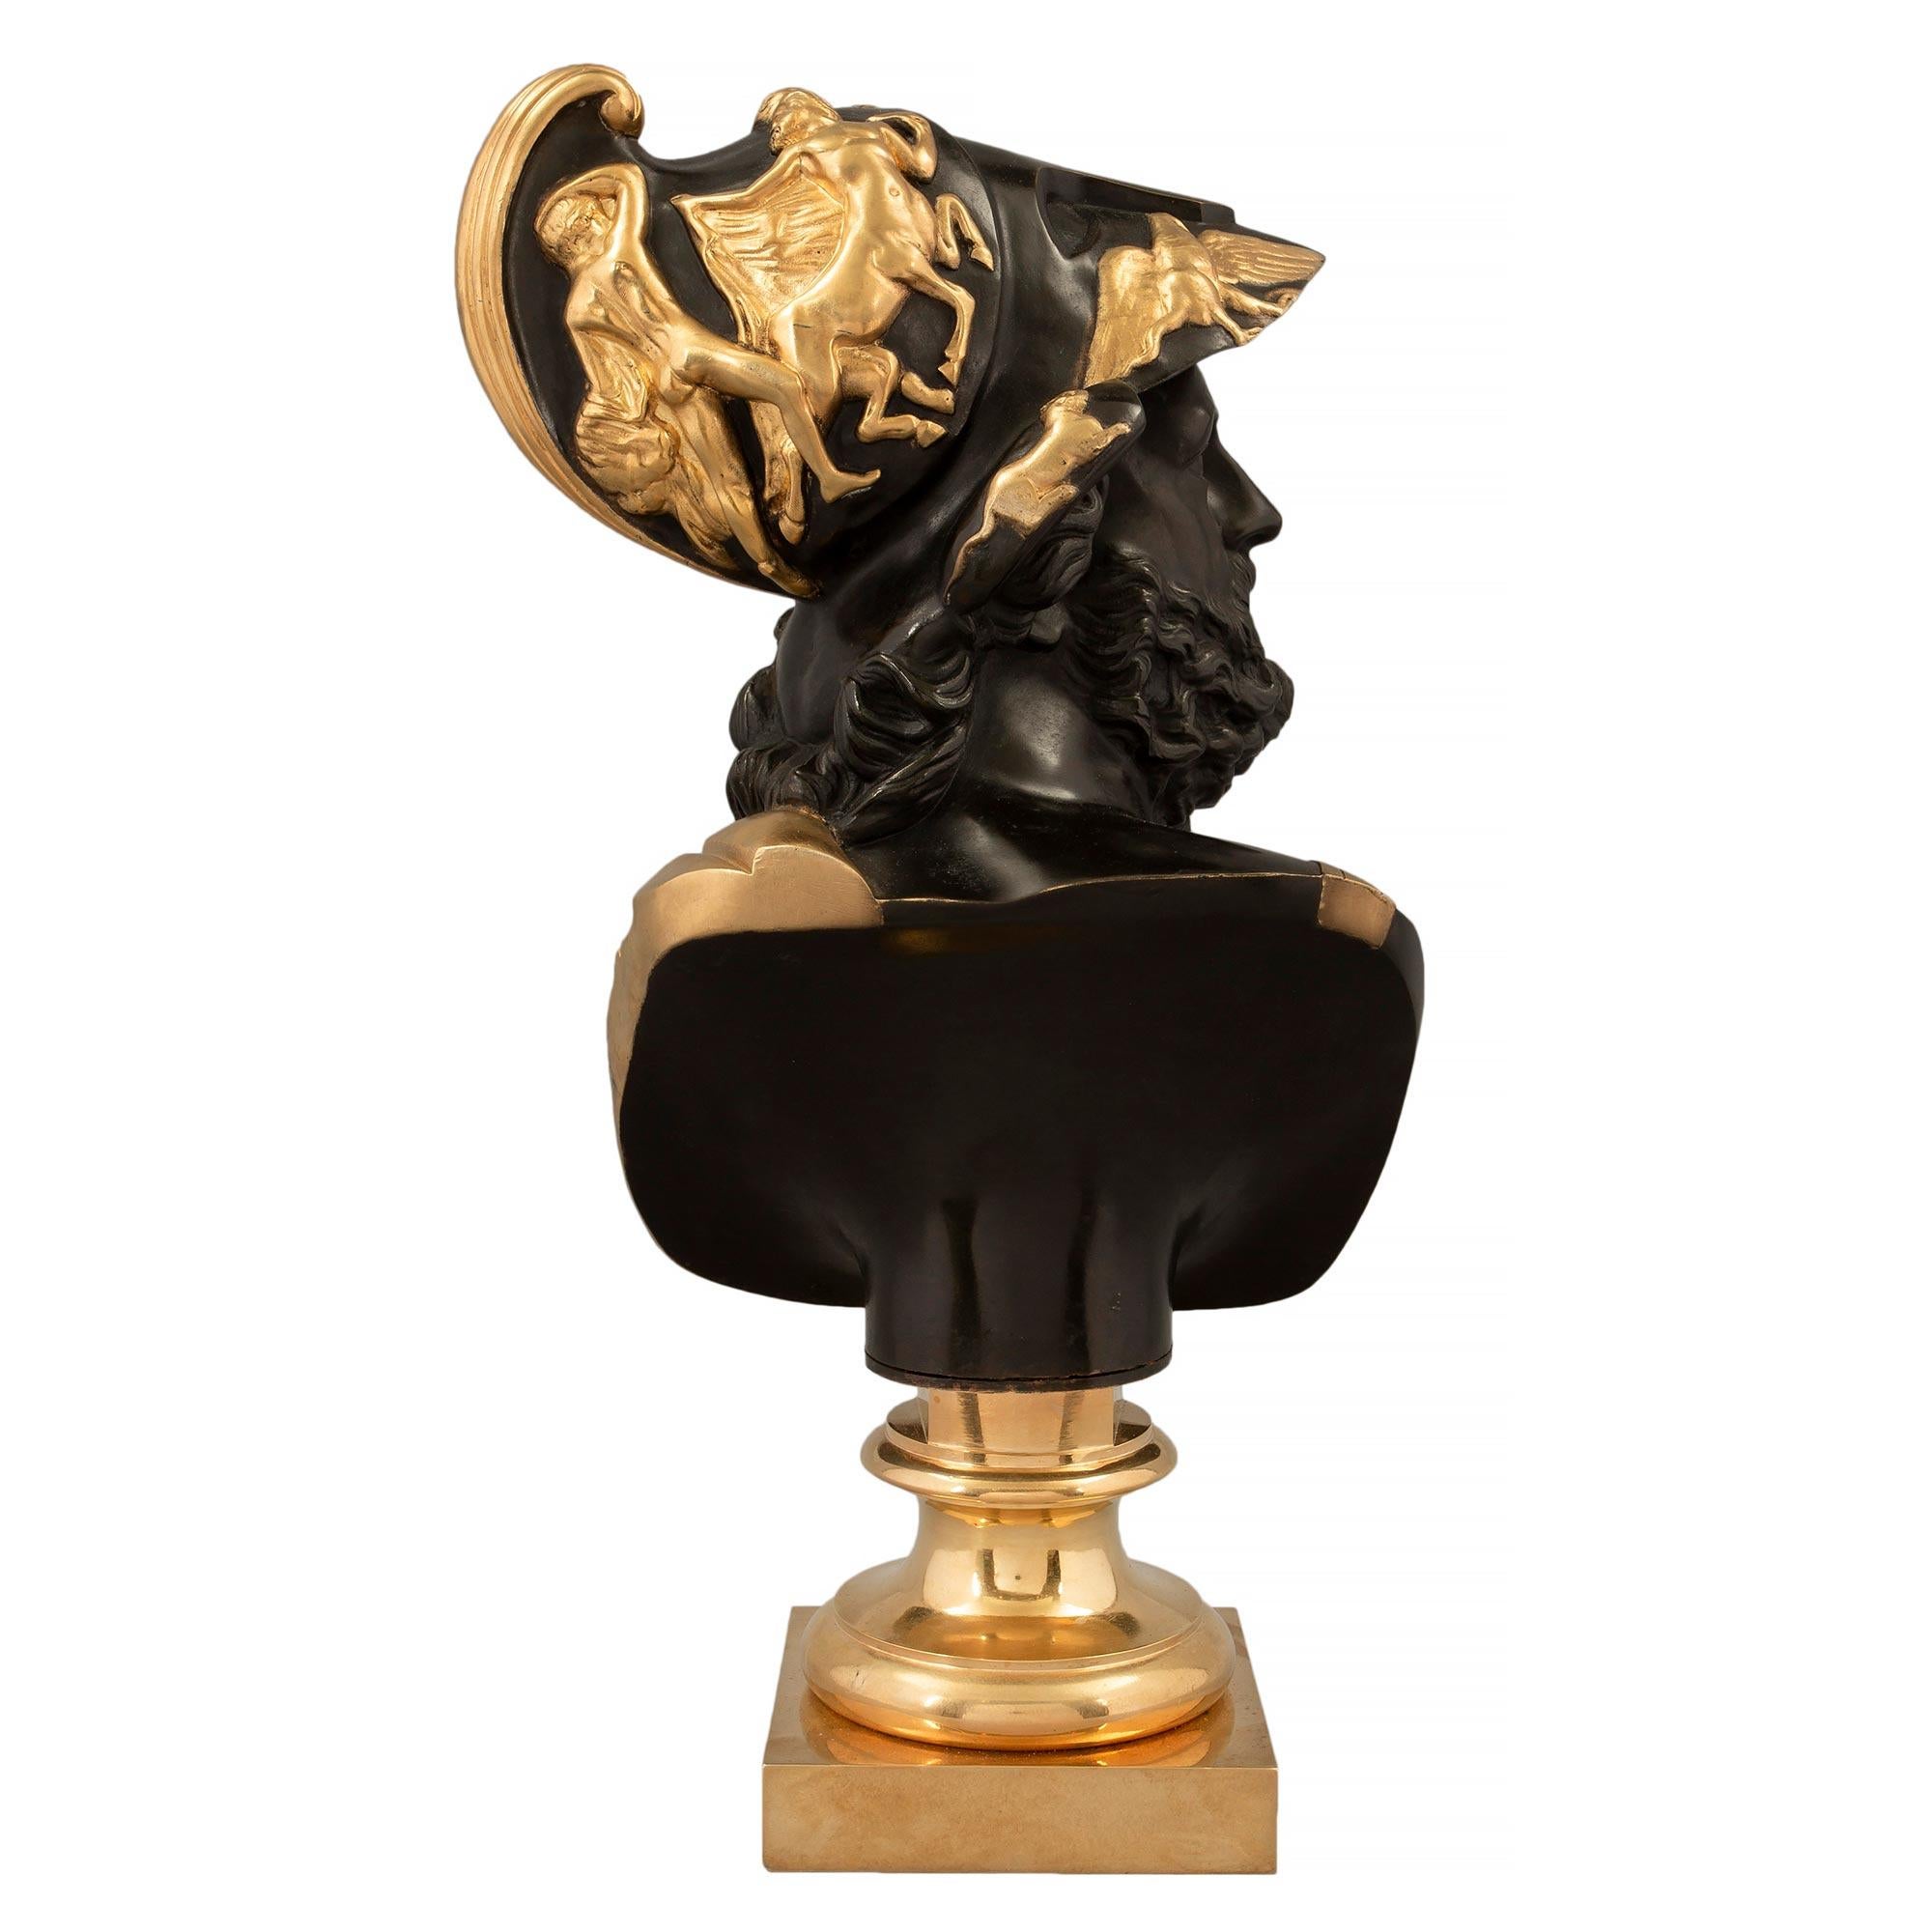 French 19th Century Louis XVI Style Patinated Bronze and Ormolu Bust of Menelaus For Sale 1